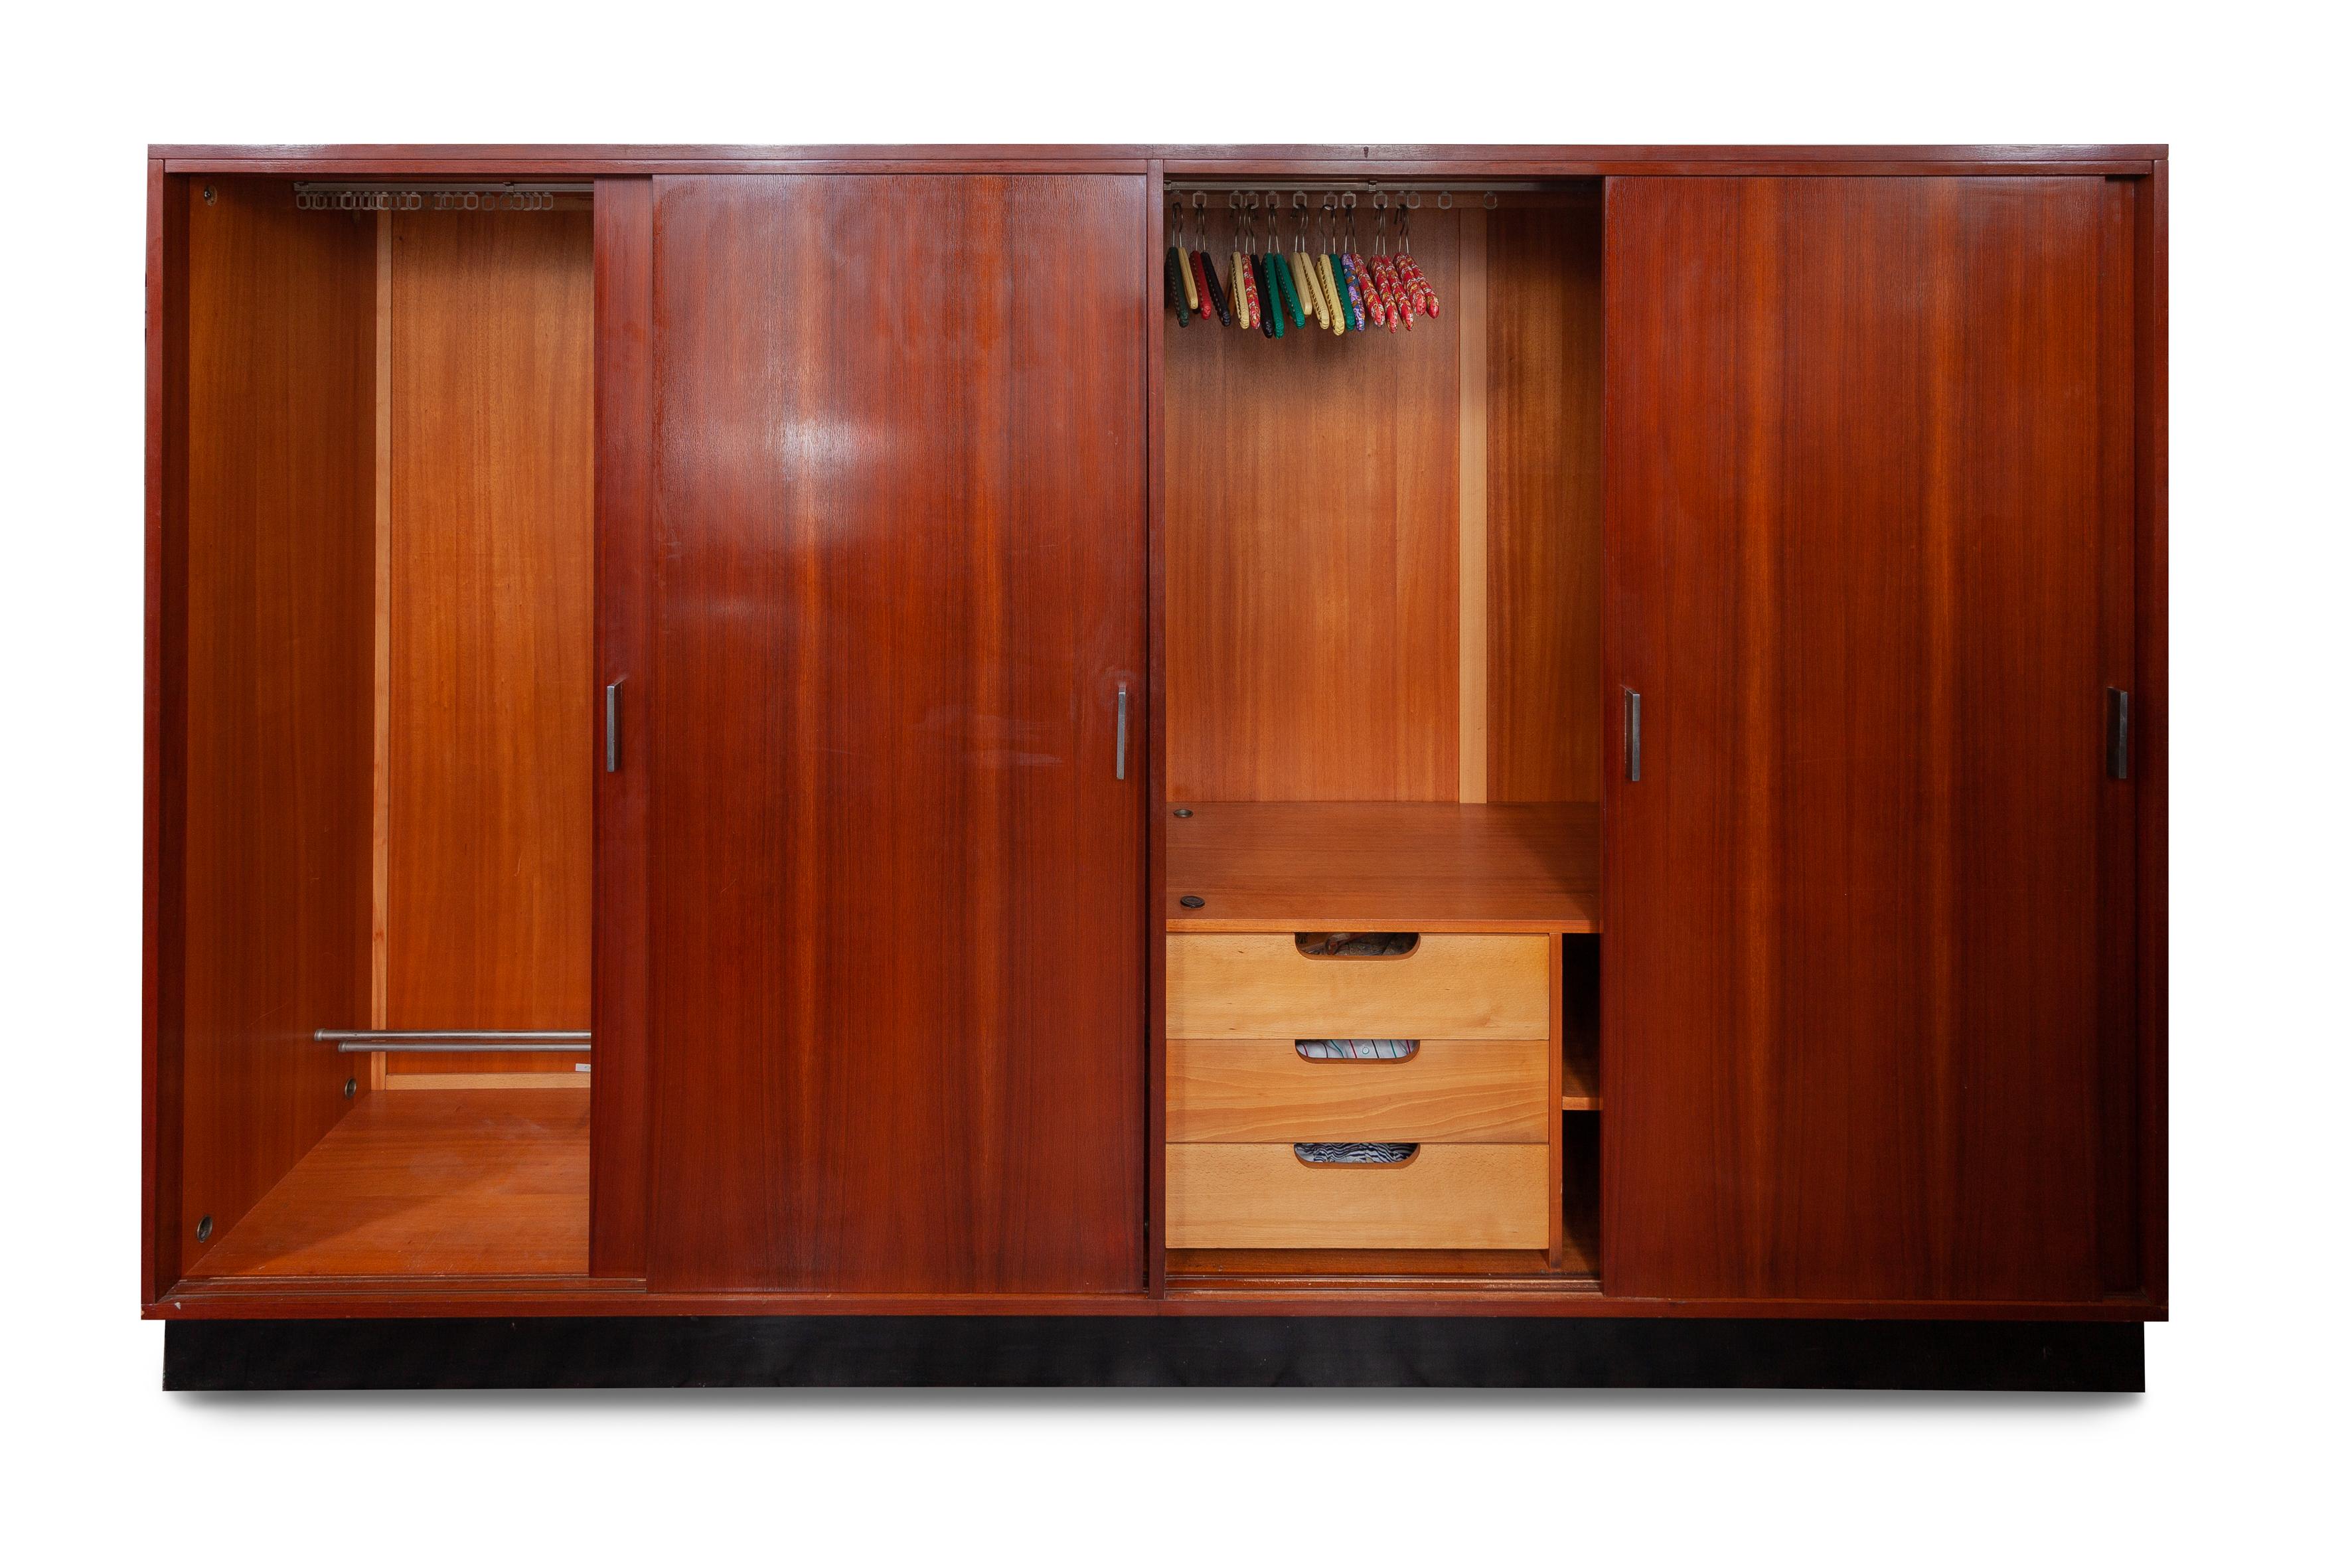 Vintage midcentury wardrobe by Alfred Hendrickx for Belform Belgium. Beautiful warm exotic wood frame on floating black platform base. Silver metal handles. The sliding doors open to reveal generous hanging space, two adjustable shelves and three